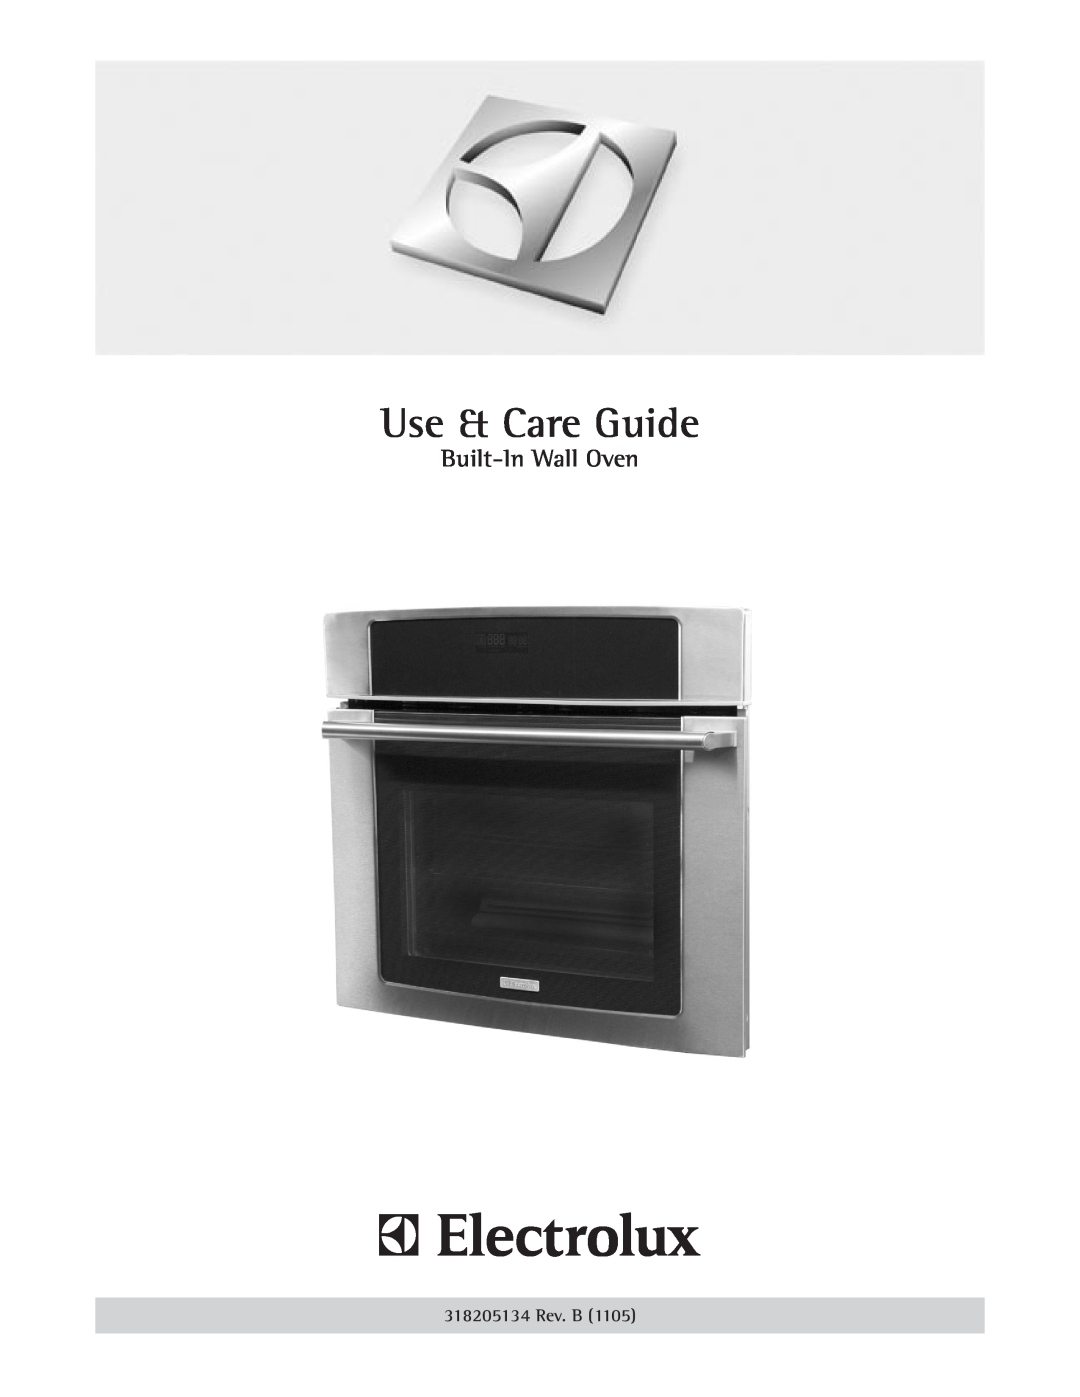 Electrolux manual Use & Care Guide, Built-In Wall Oven, 318205134 Rev. B 